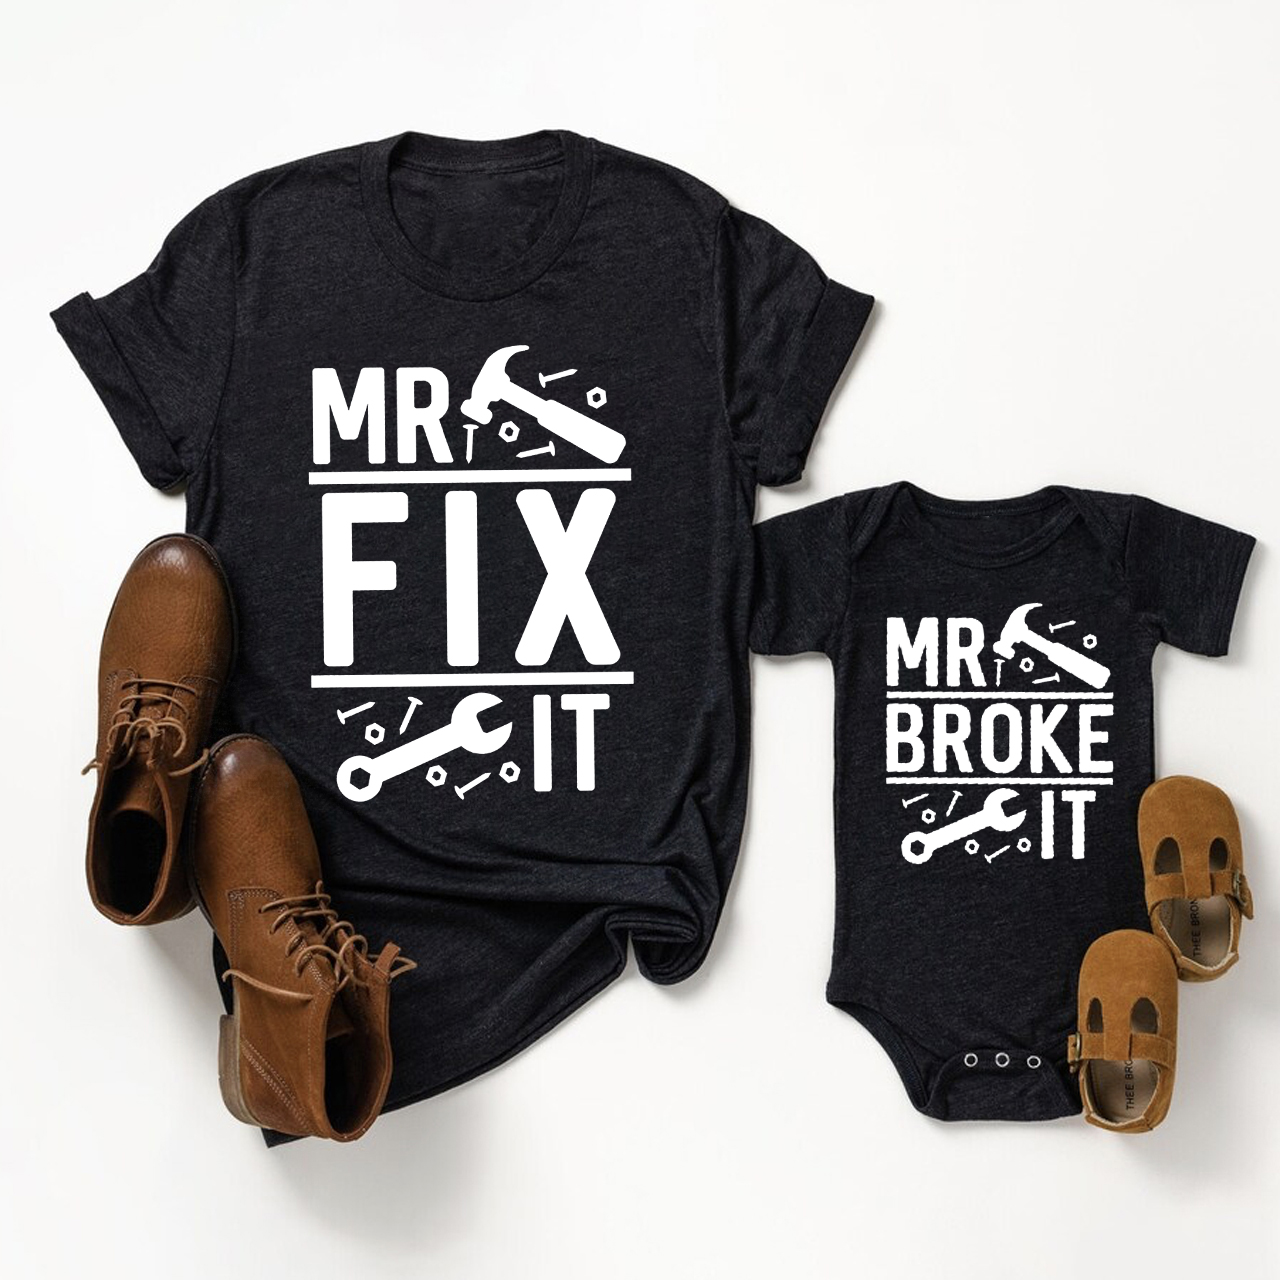 Fix & Broke Matching Tees For Father's Day